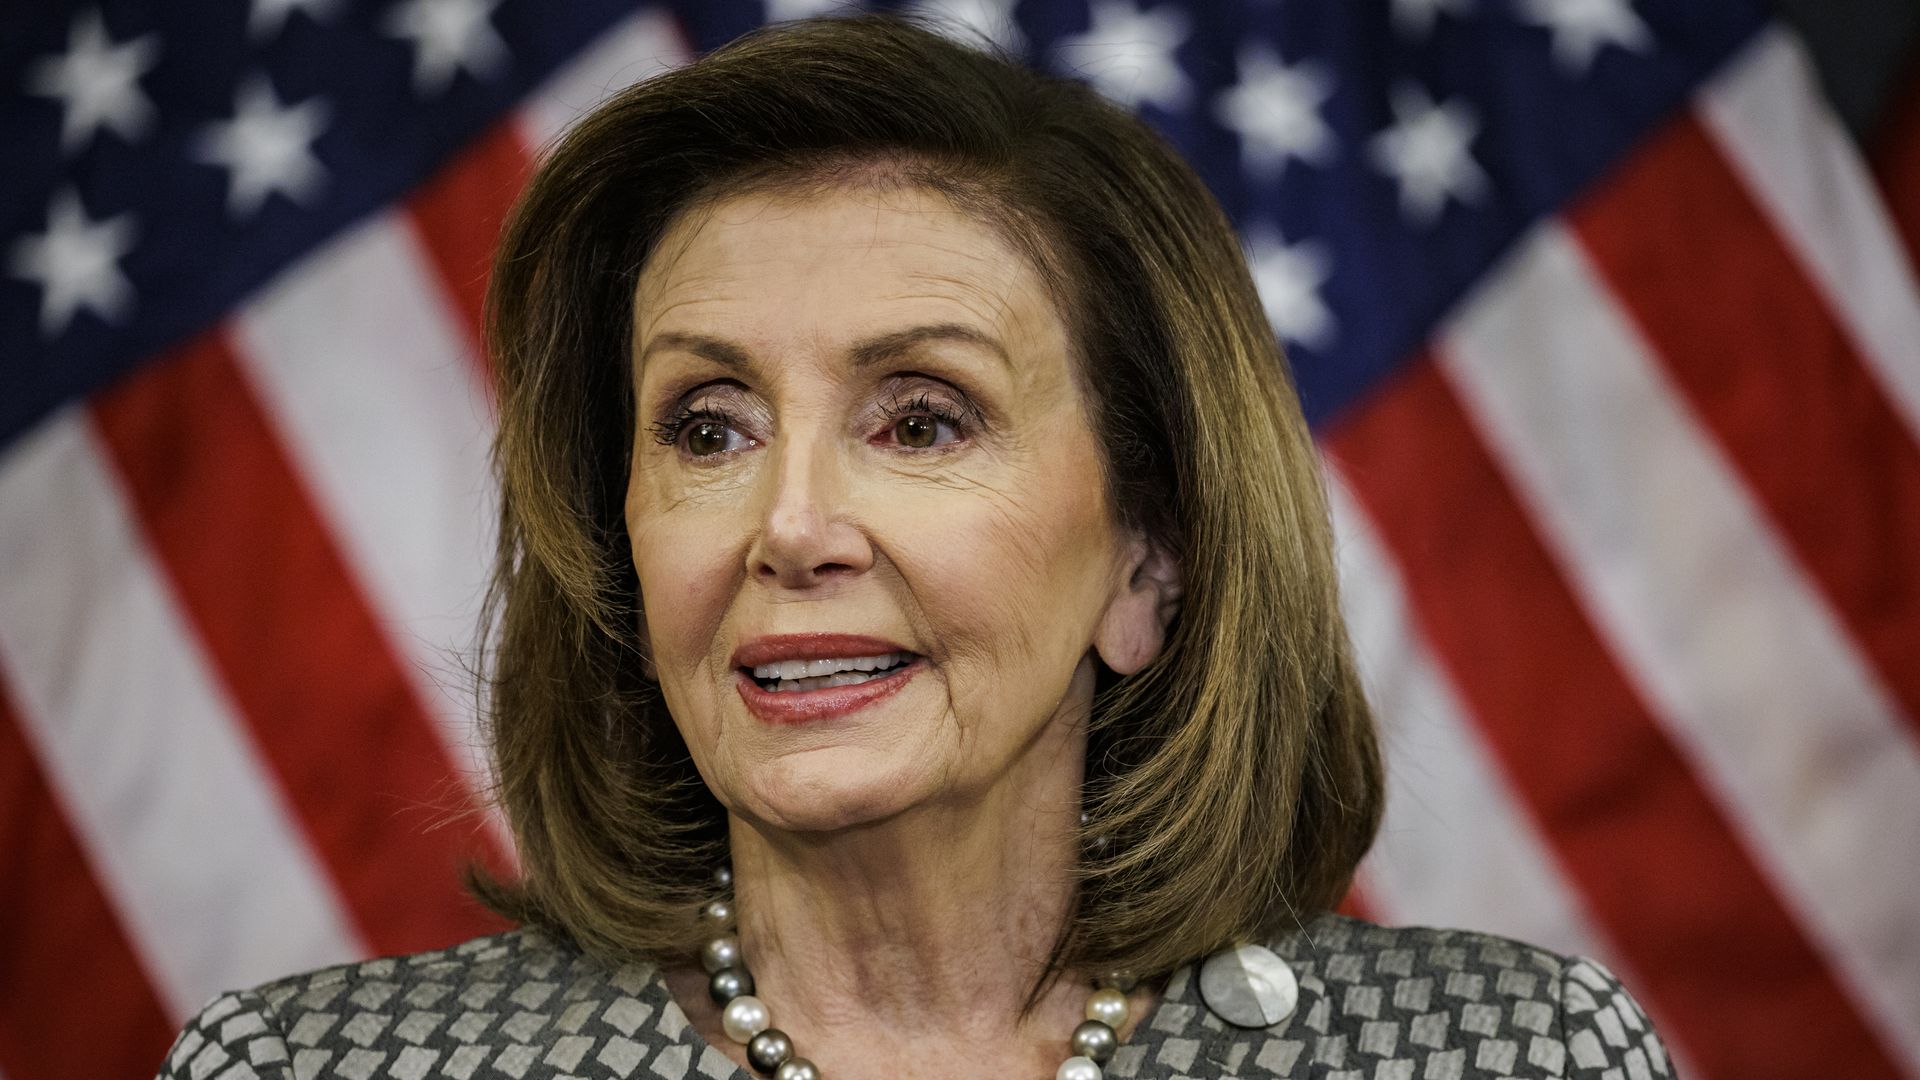 House Speaker Nancy Pelosi is seen during a news conference.